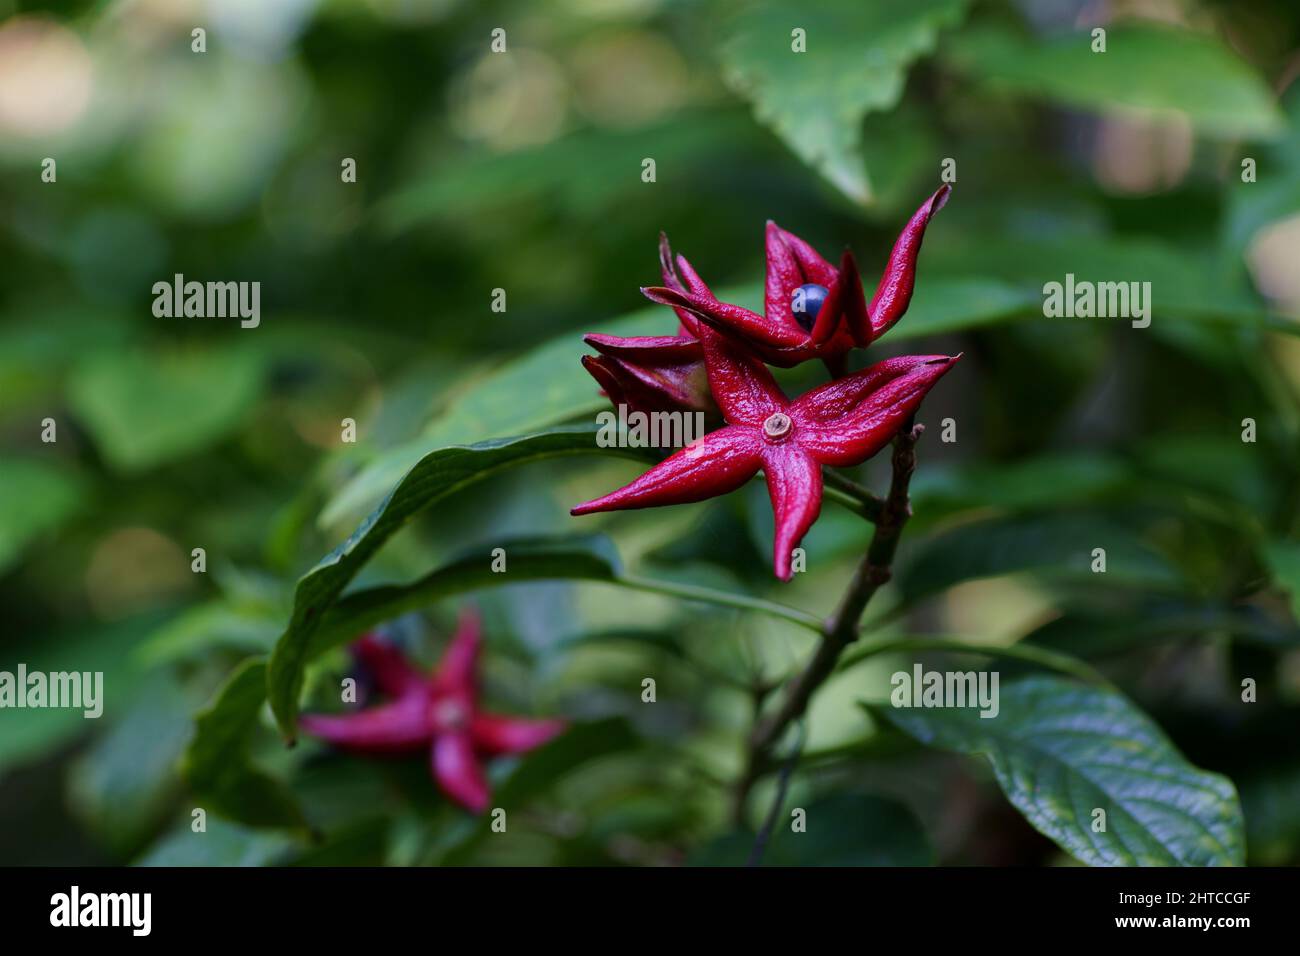 Closeup of a Clerodendrum tripartite blossom on a stem with green leaves Stock Photo